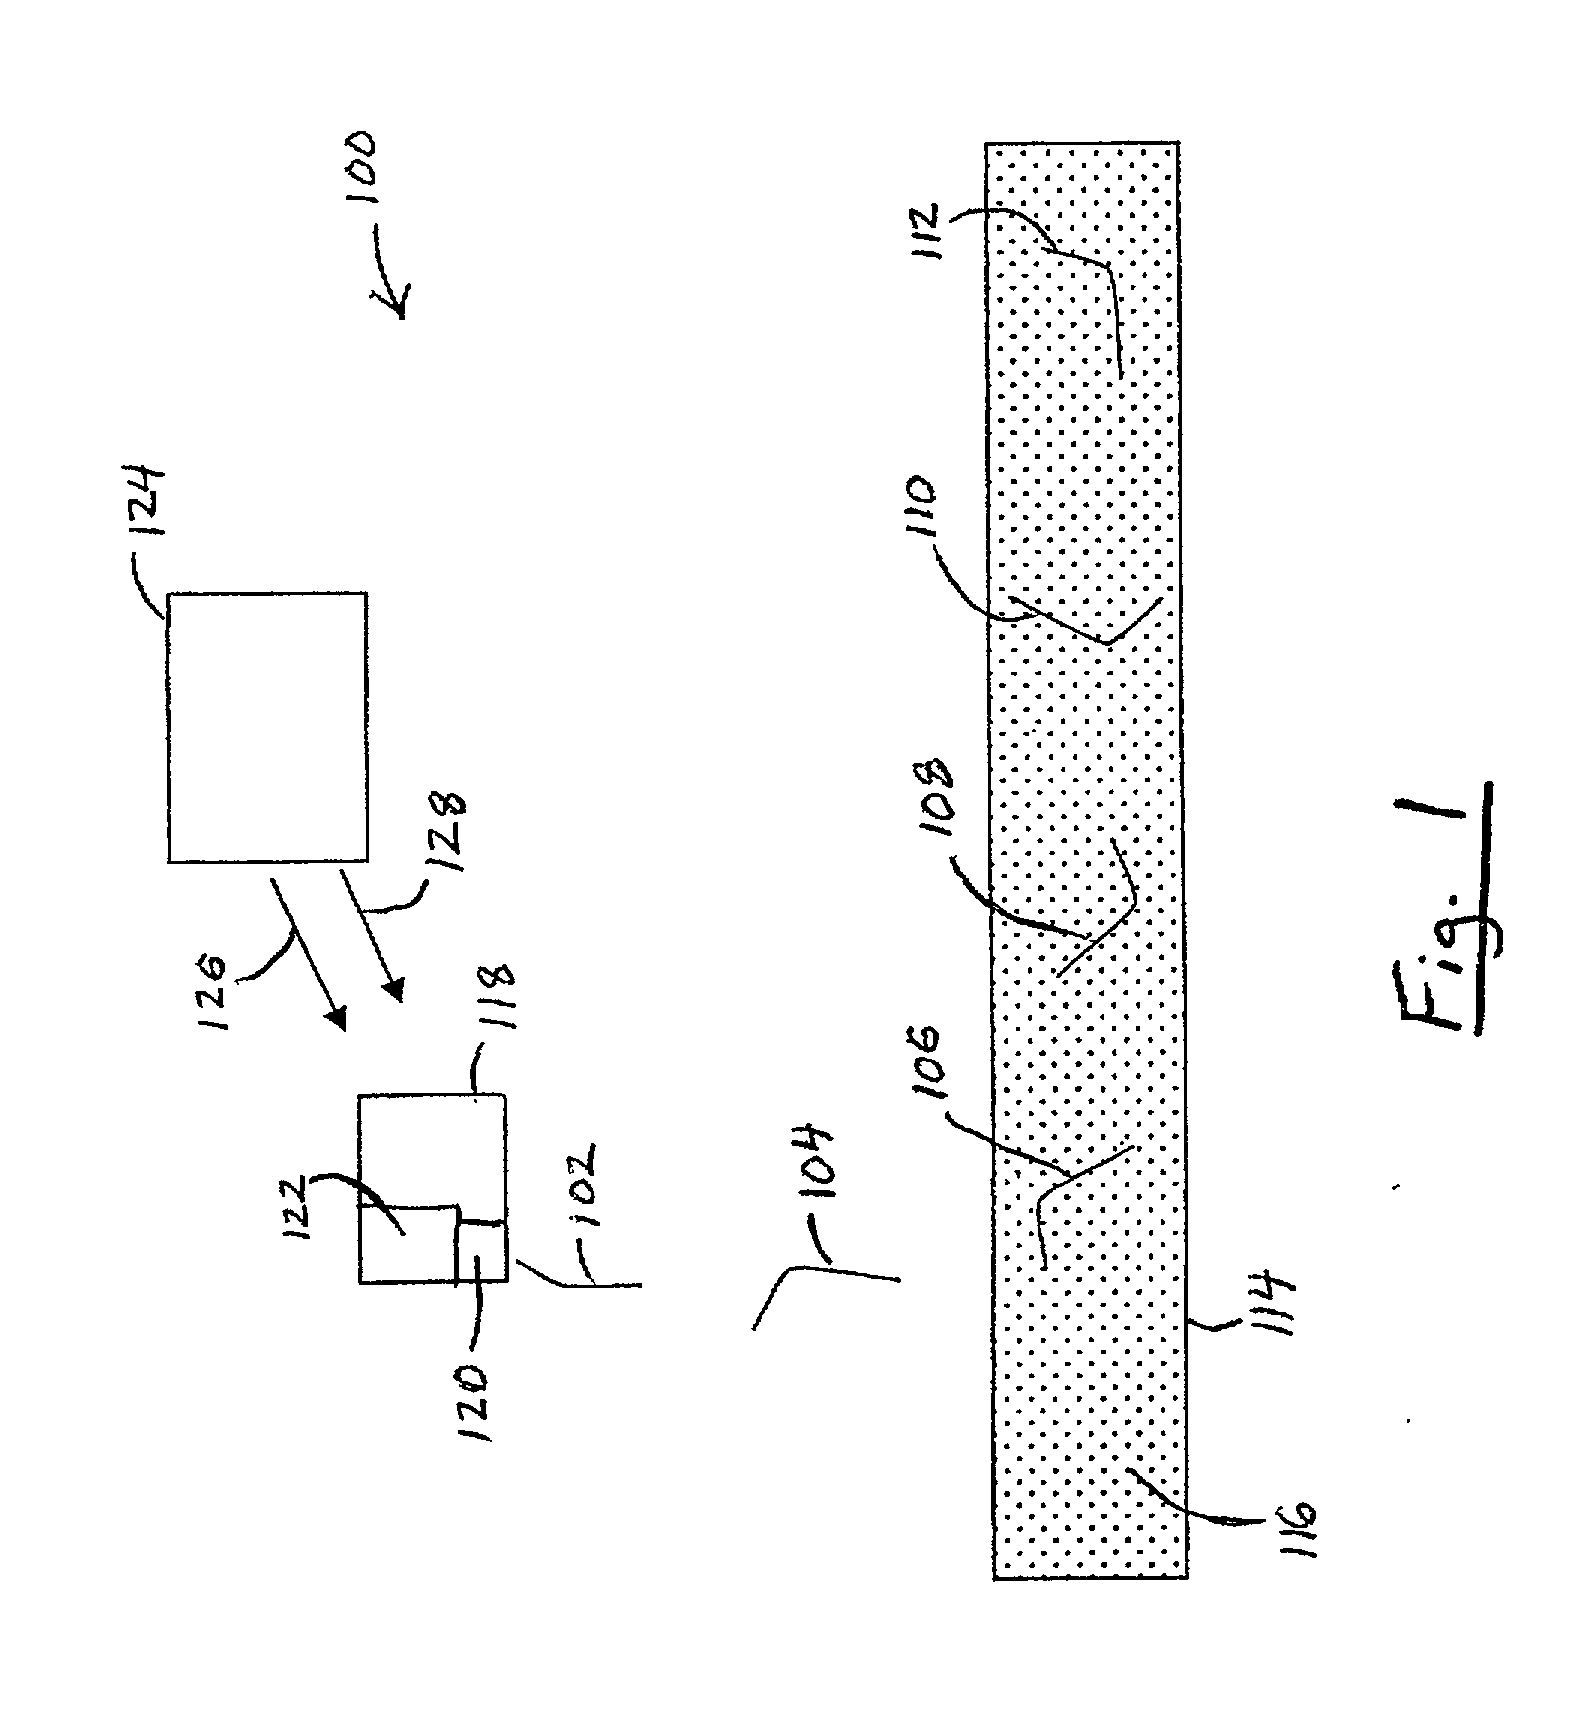 System, apparatus and method for marking and tracking bulk flowable material